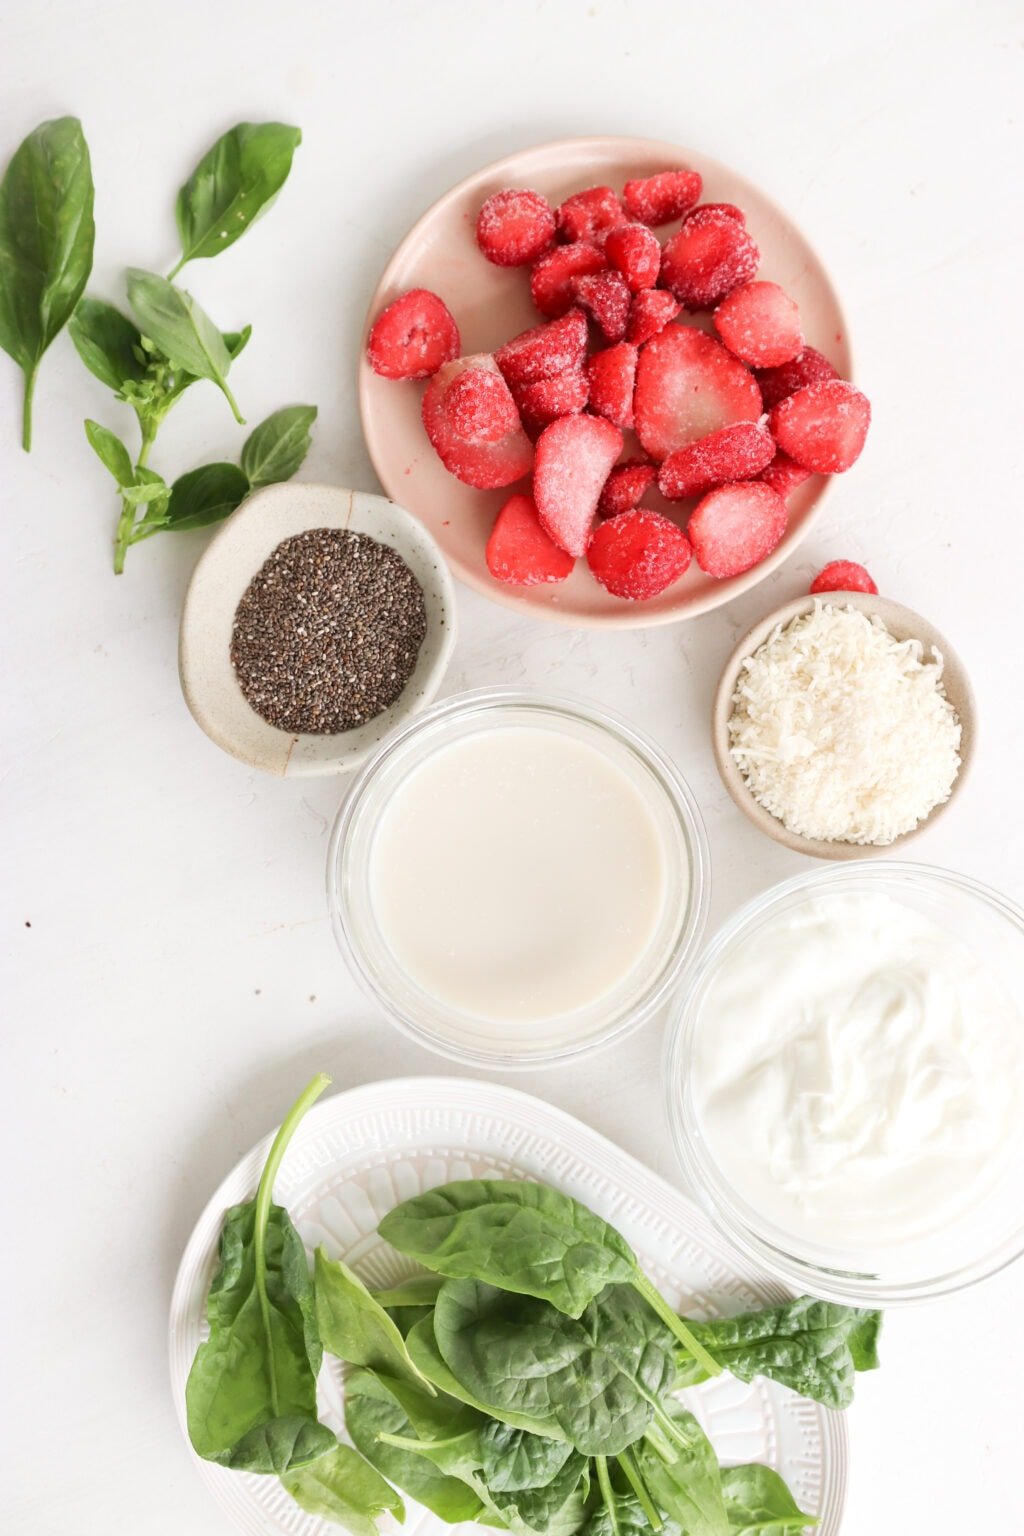 Ingredients for 5 Minute Frozen Strawberry & Basil Smoothie in glass bowls on a marble counter, including milk, Greek Yogurt, chia seeds, coconut flakes, strawberries, basil, and spinach